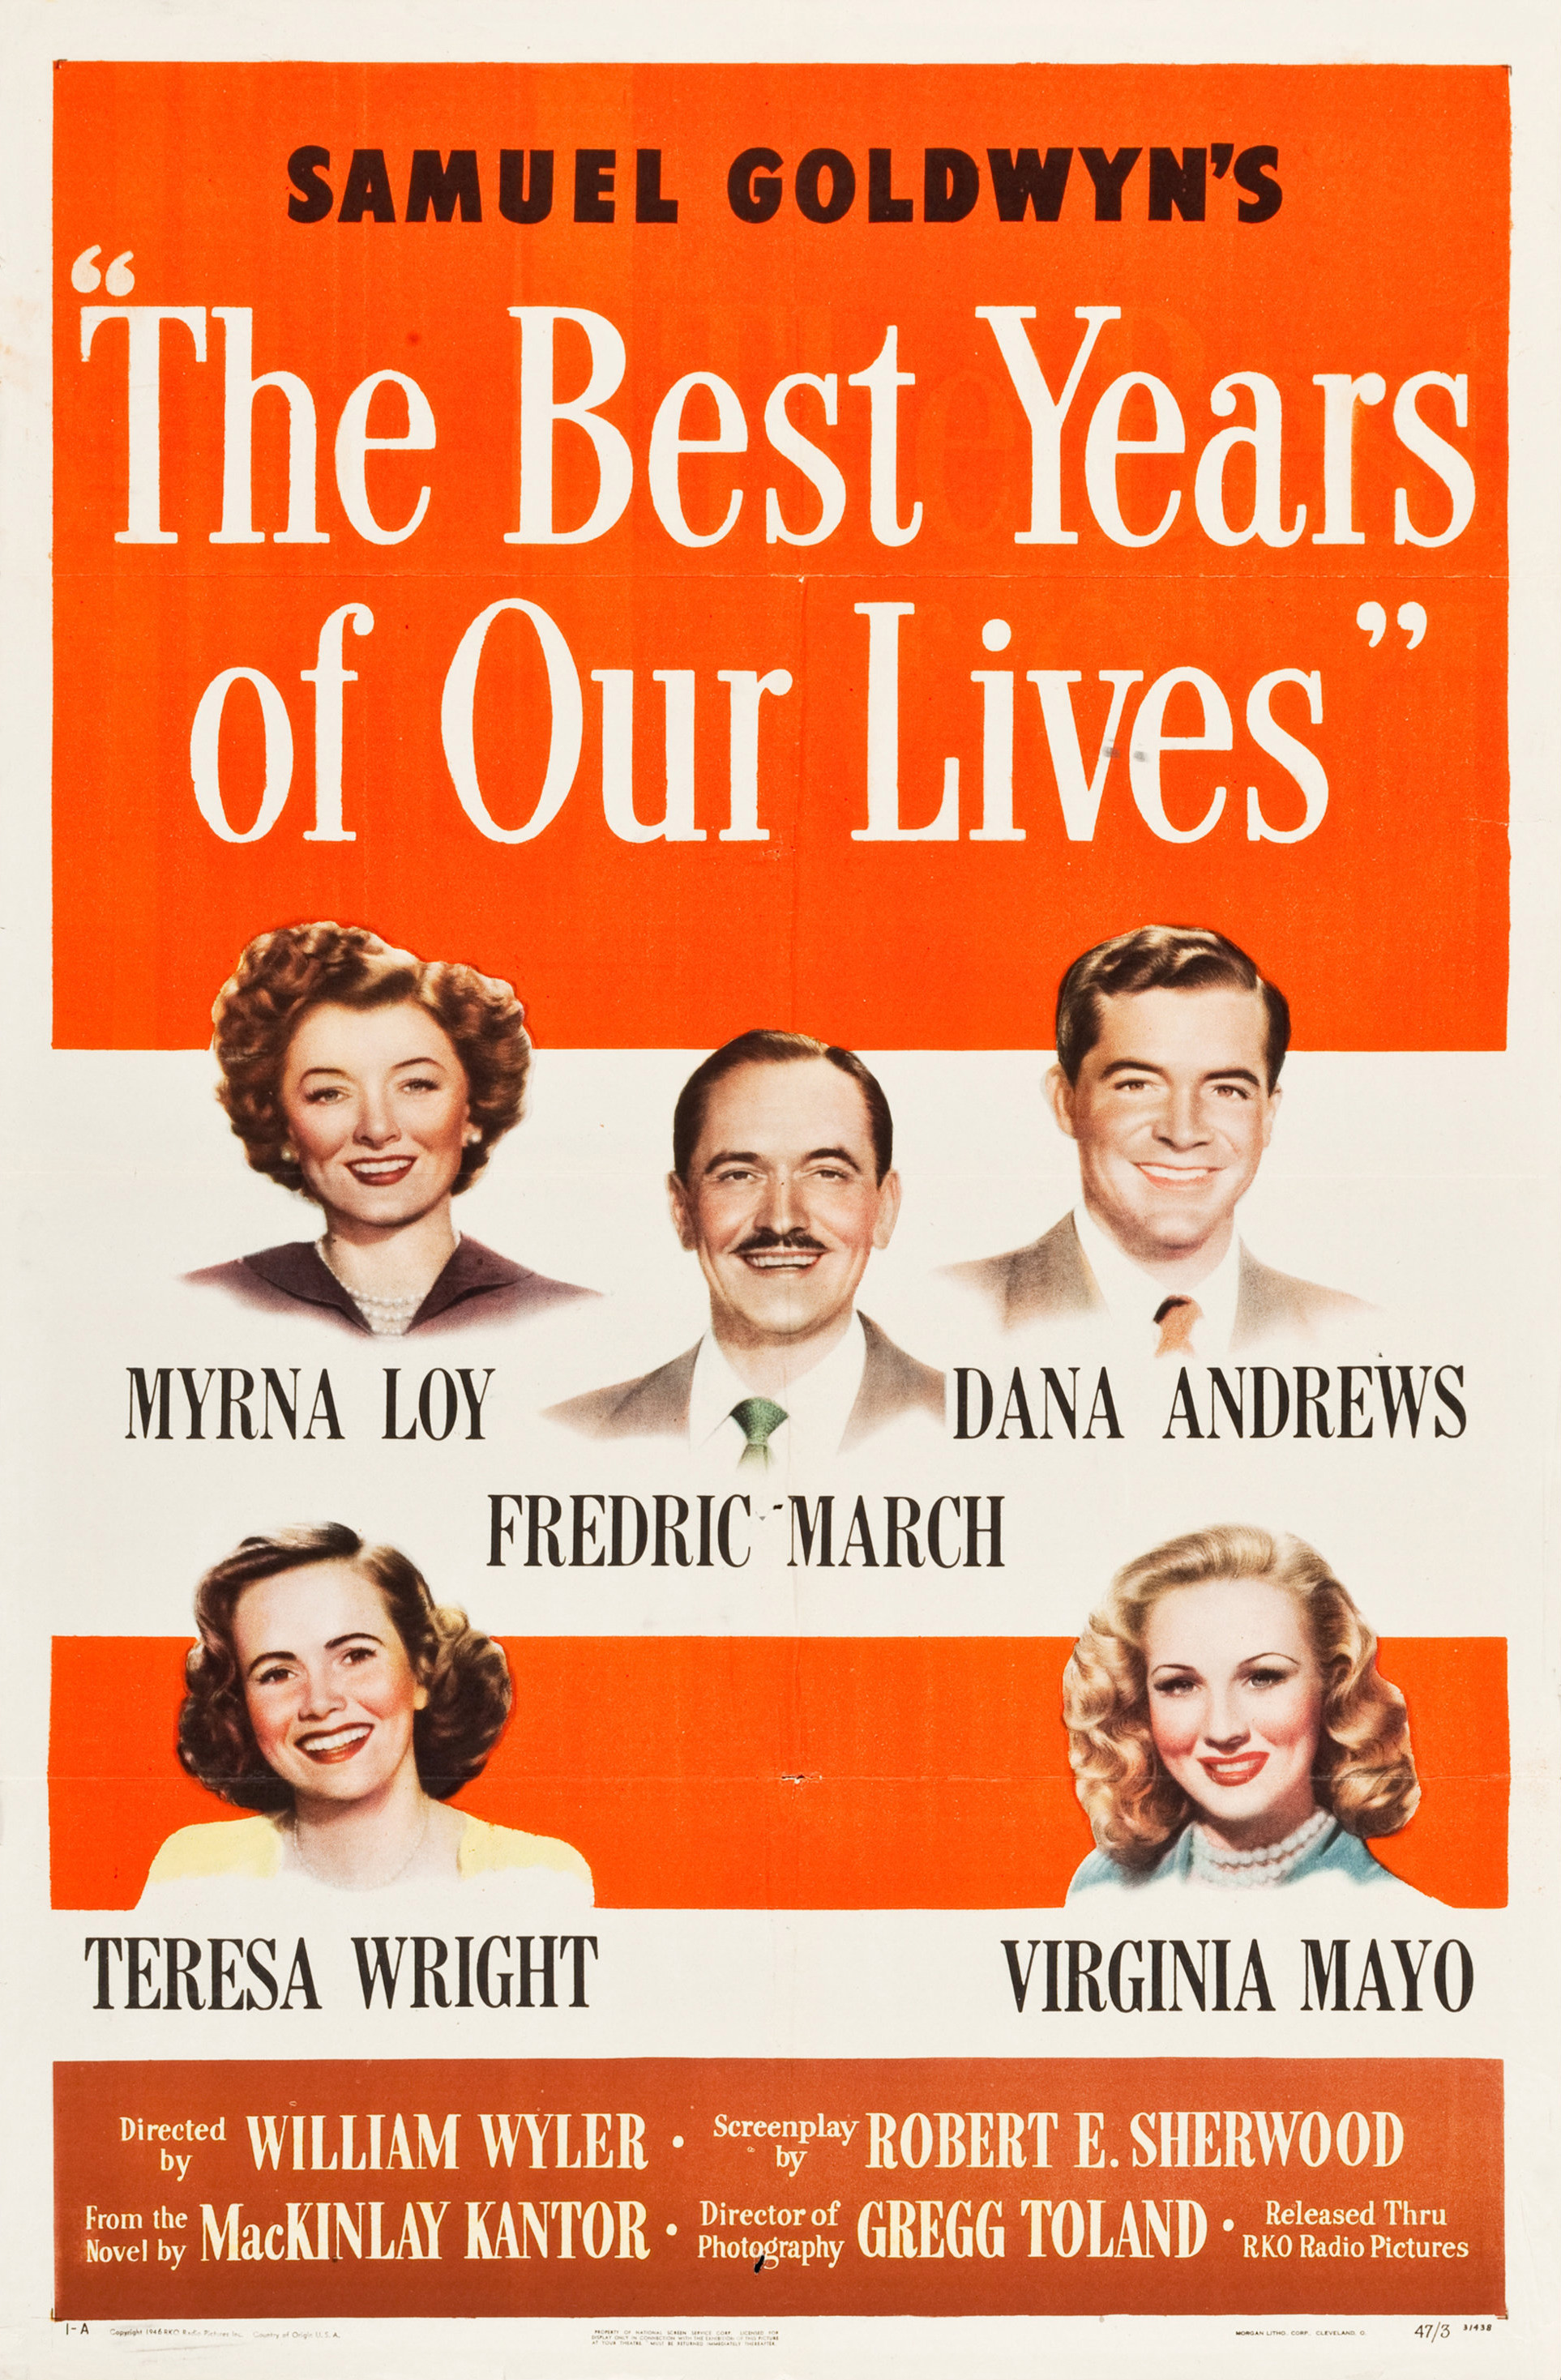 Graphic image of the movie poster for The Best Years of Our Lives